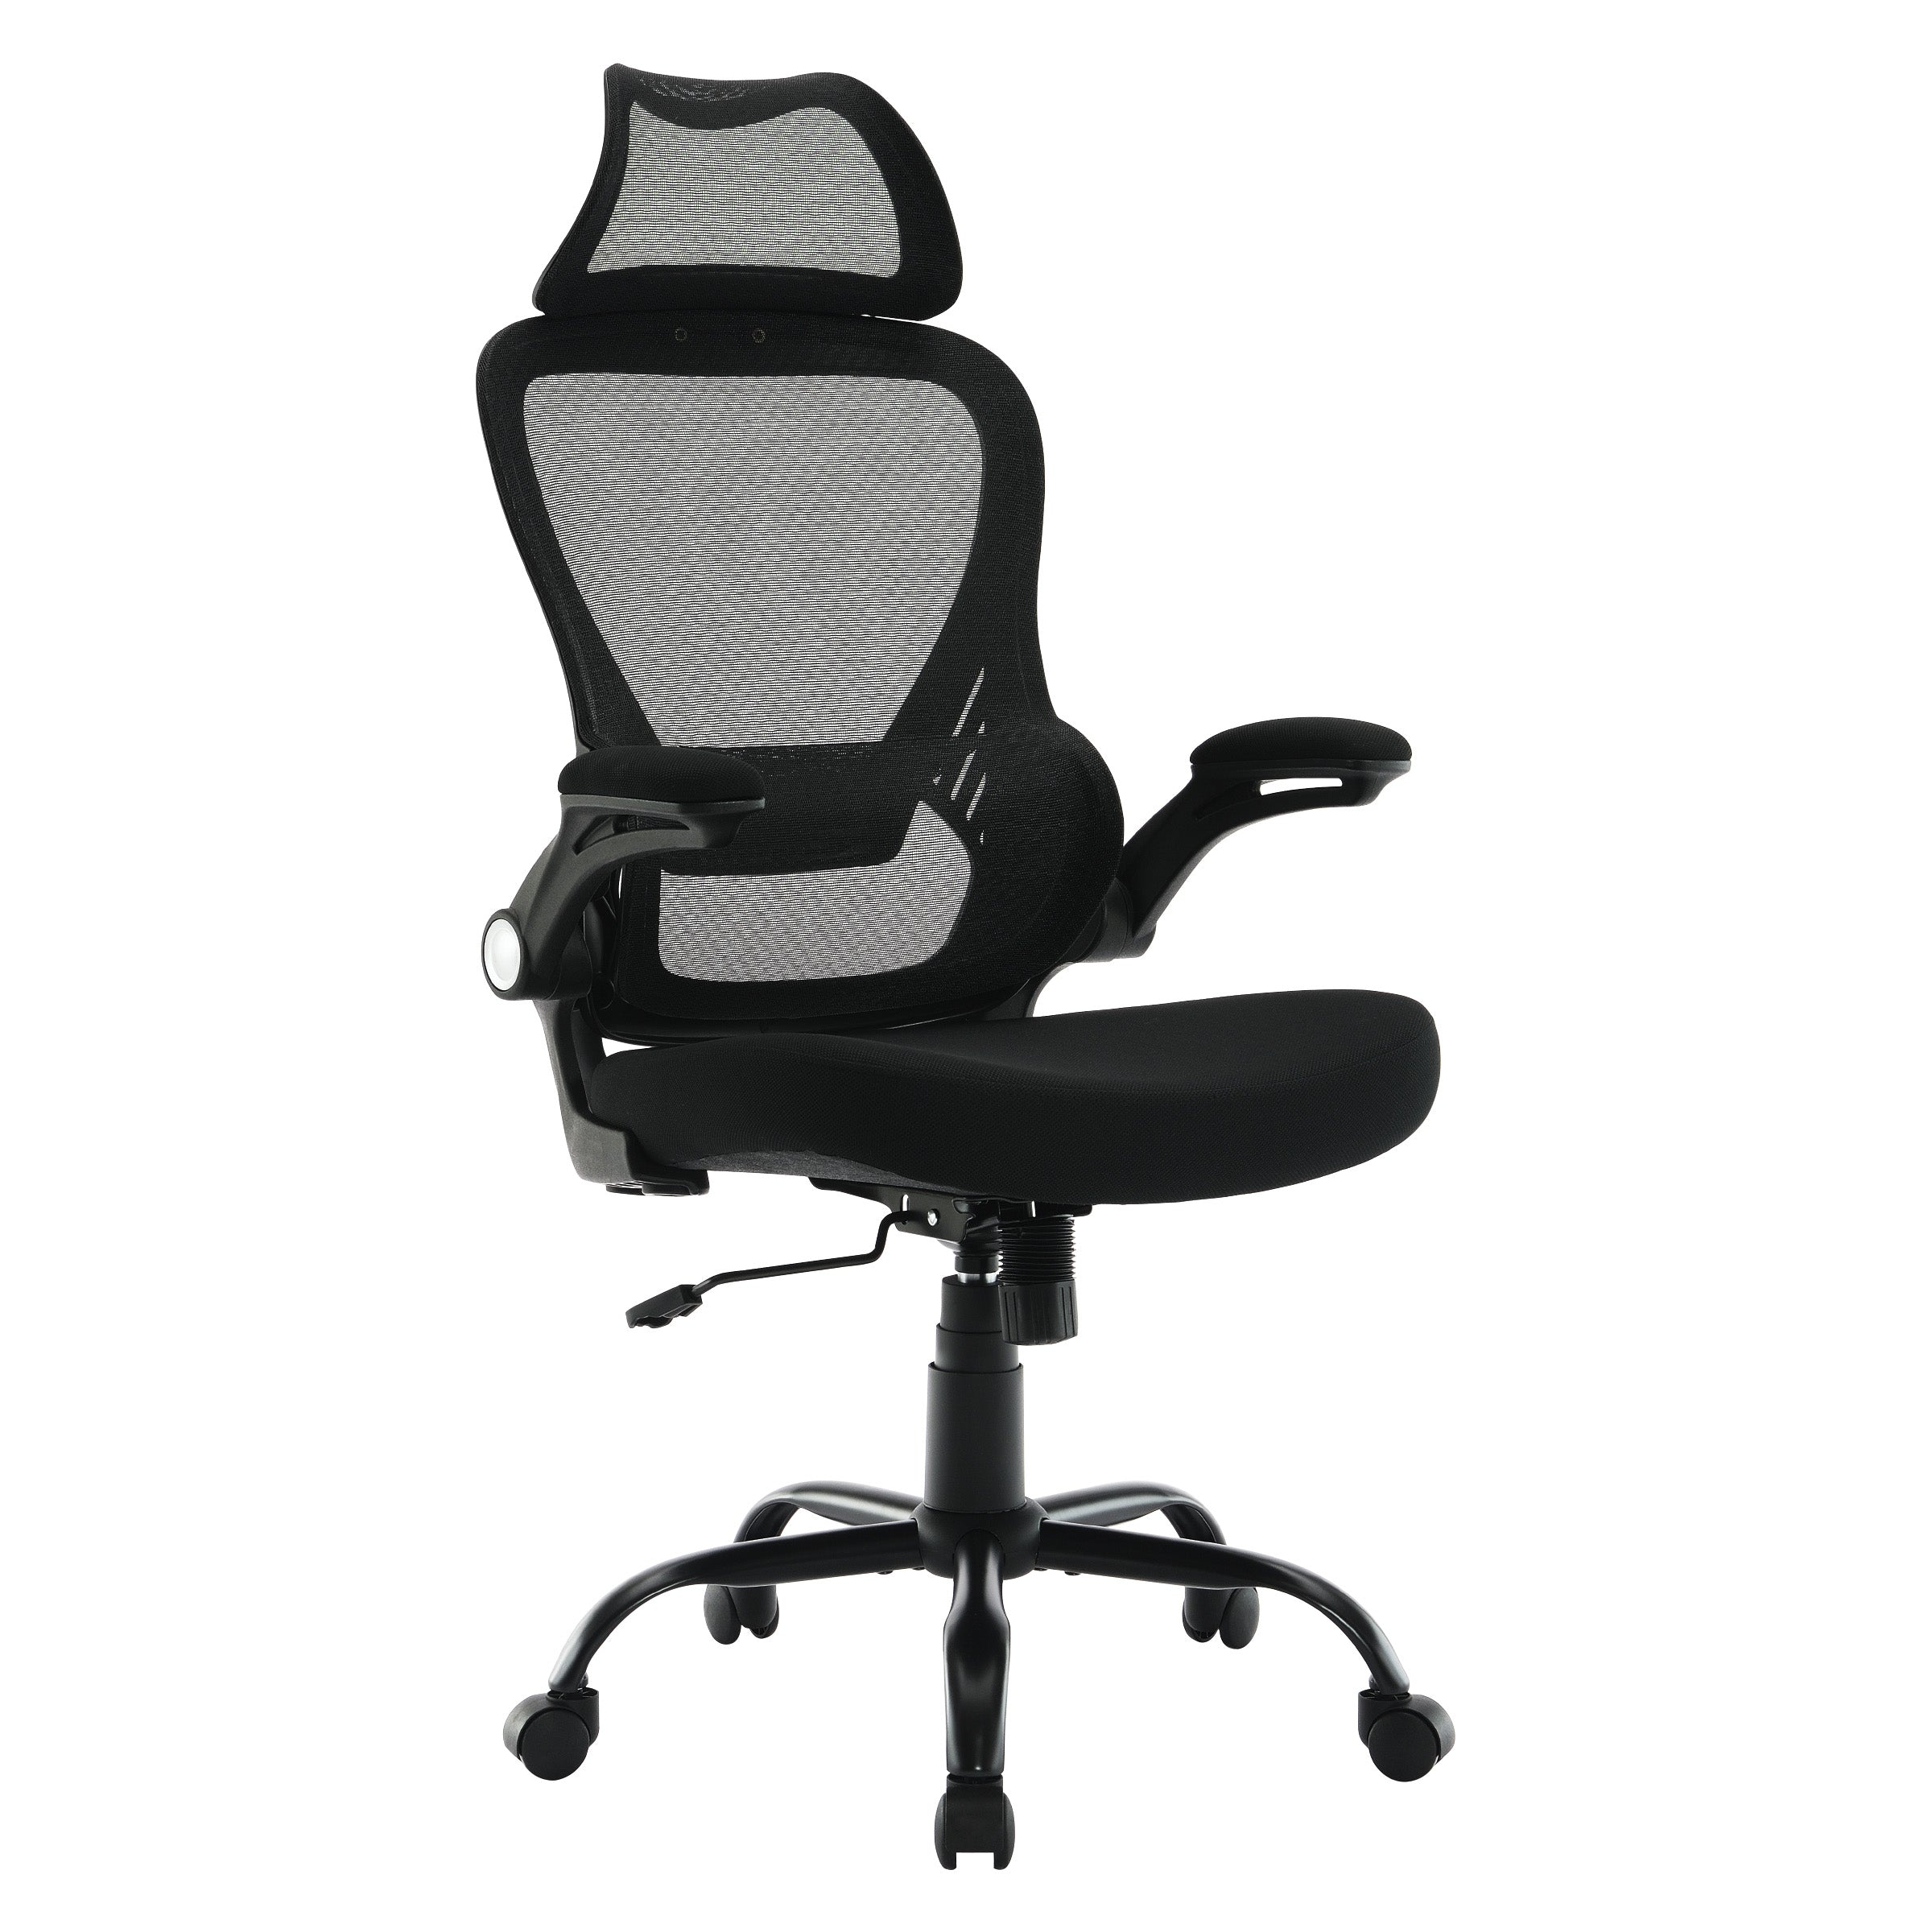 EM60946HR - Mesh Back Manager's Chair with Headrest by Office Star